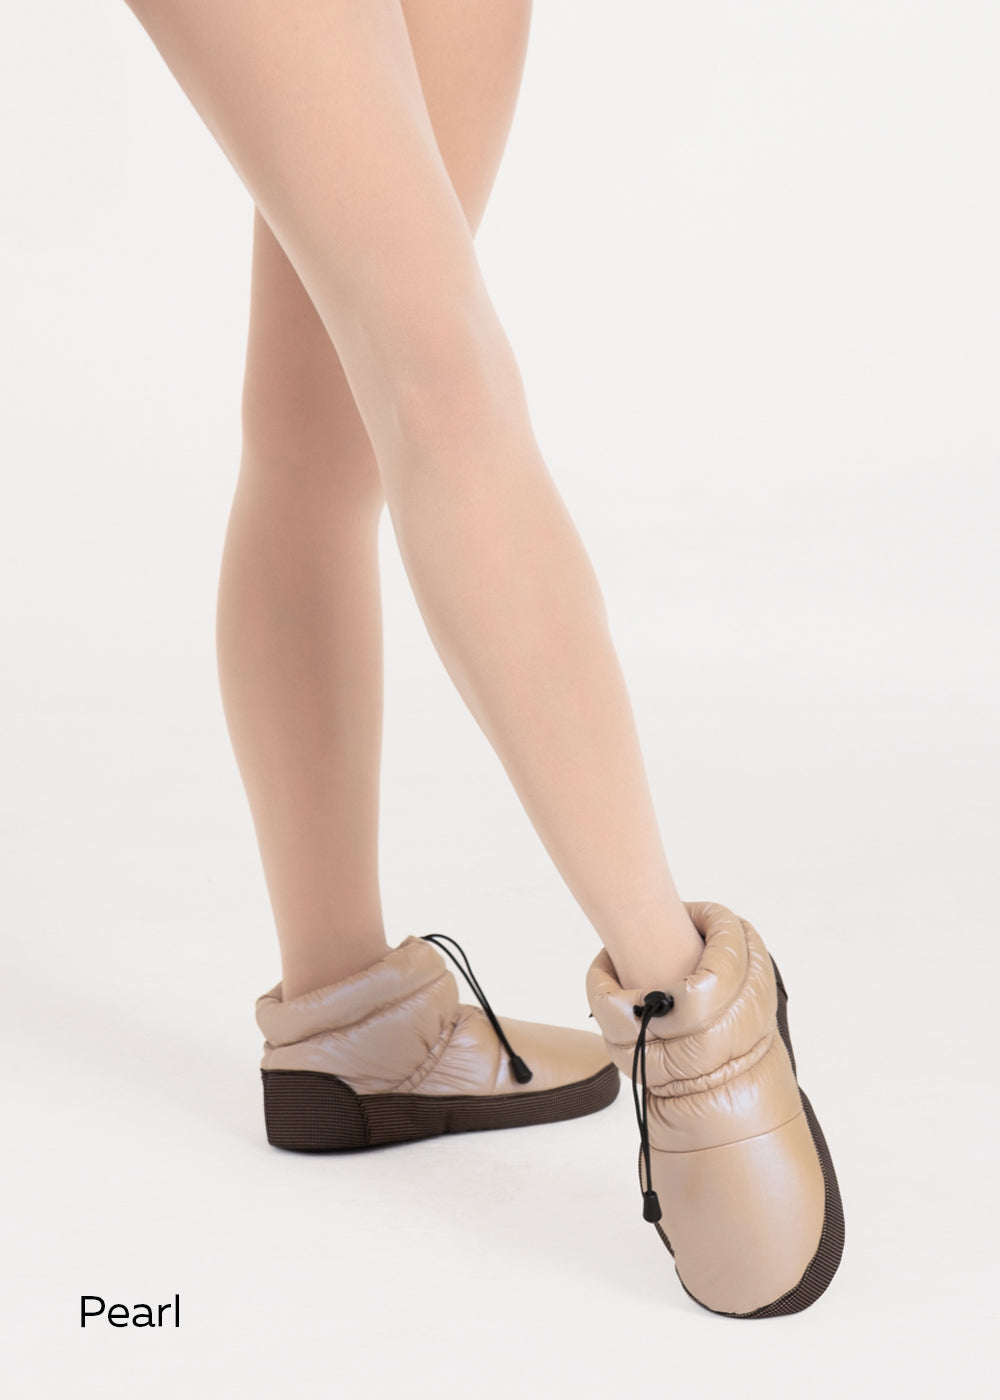 Heat retention wear (with sauna effect)  Nikolay® - official online shop  of pointe shoes and dance apparel in the USA